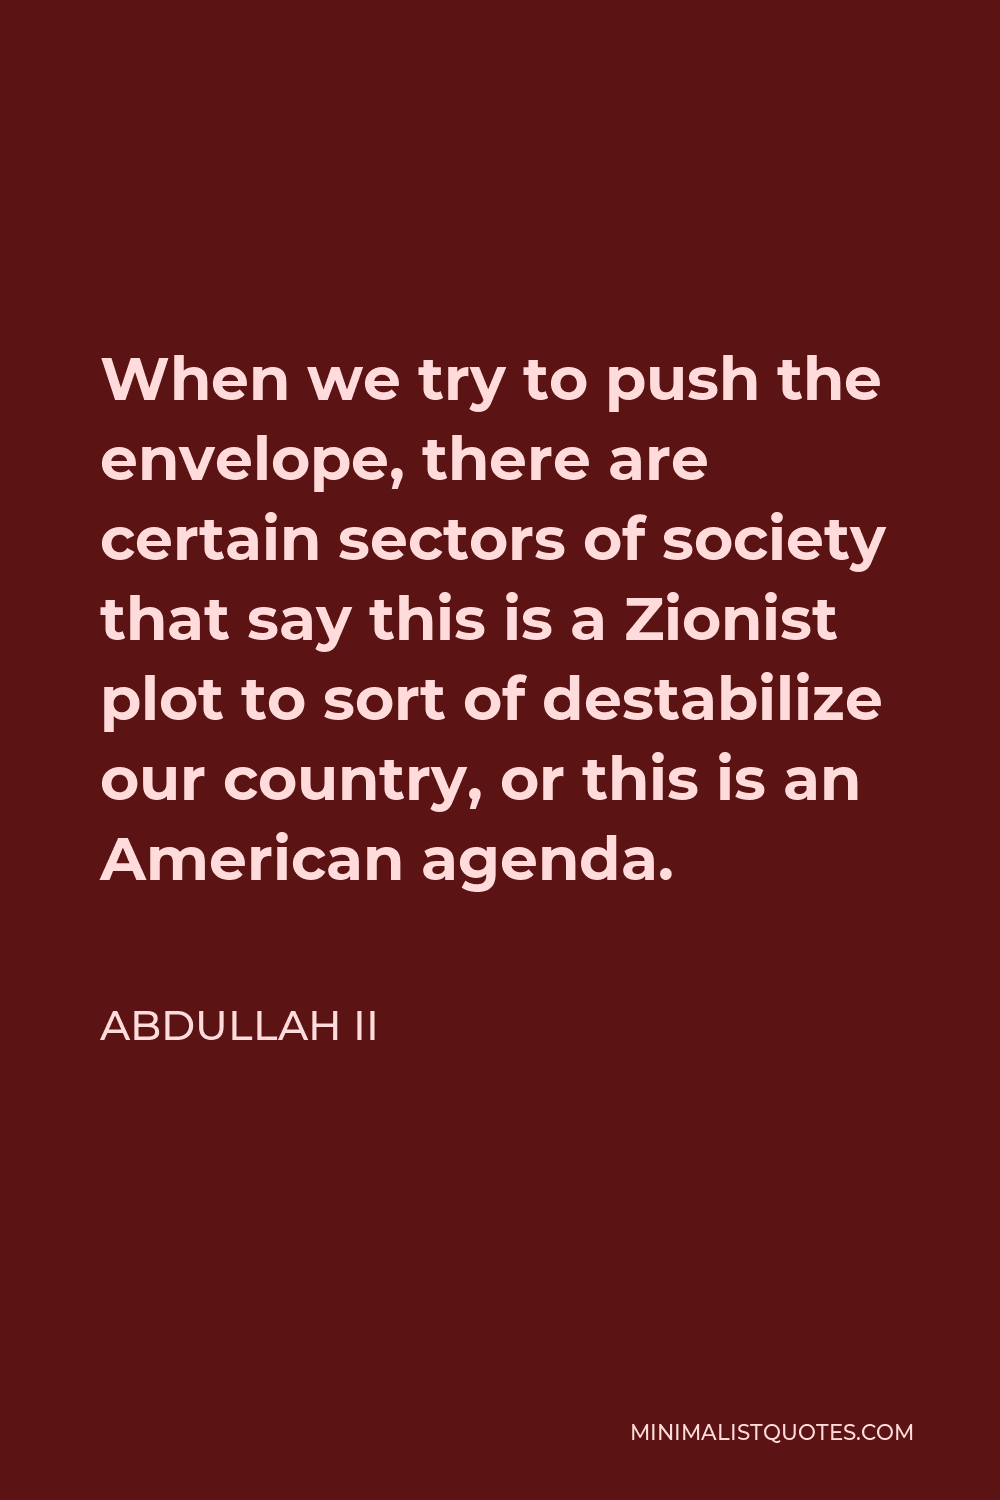 Abdullah II Quote - When we try to push the envelope, there are certain sectors of society that say this is a Zionist plot to sort of destabilize our country, or this is an American agenda.